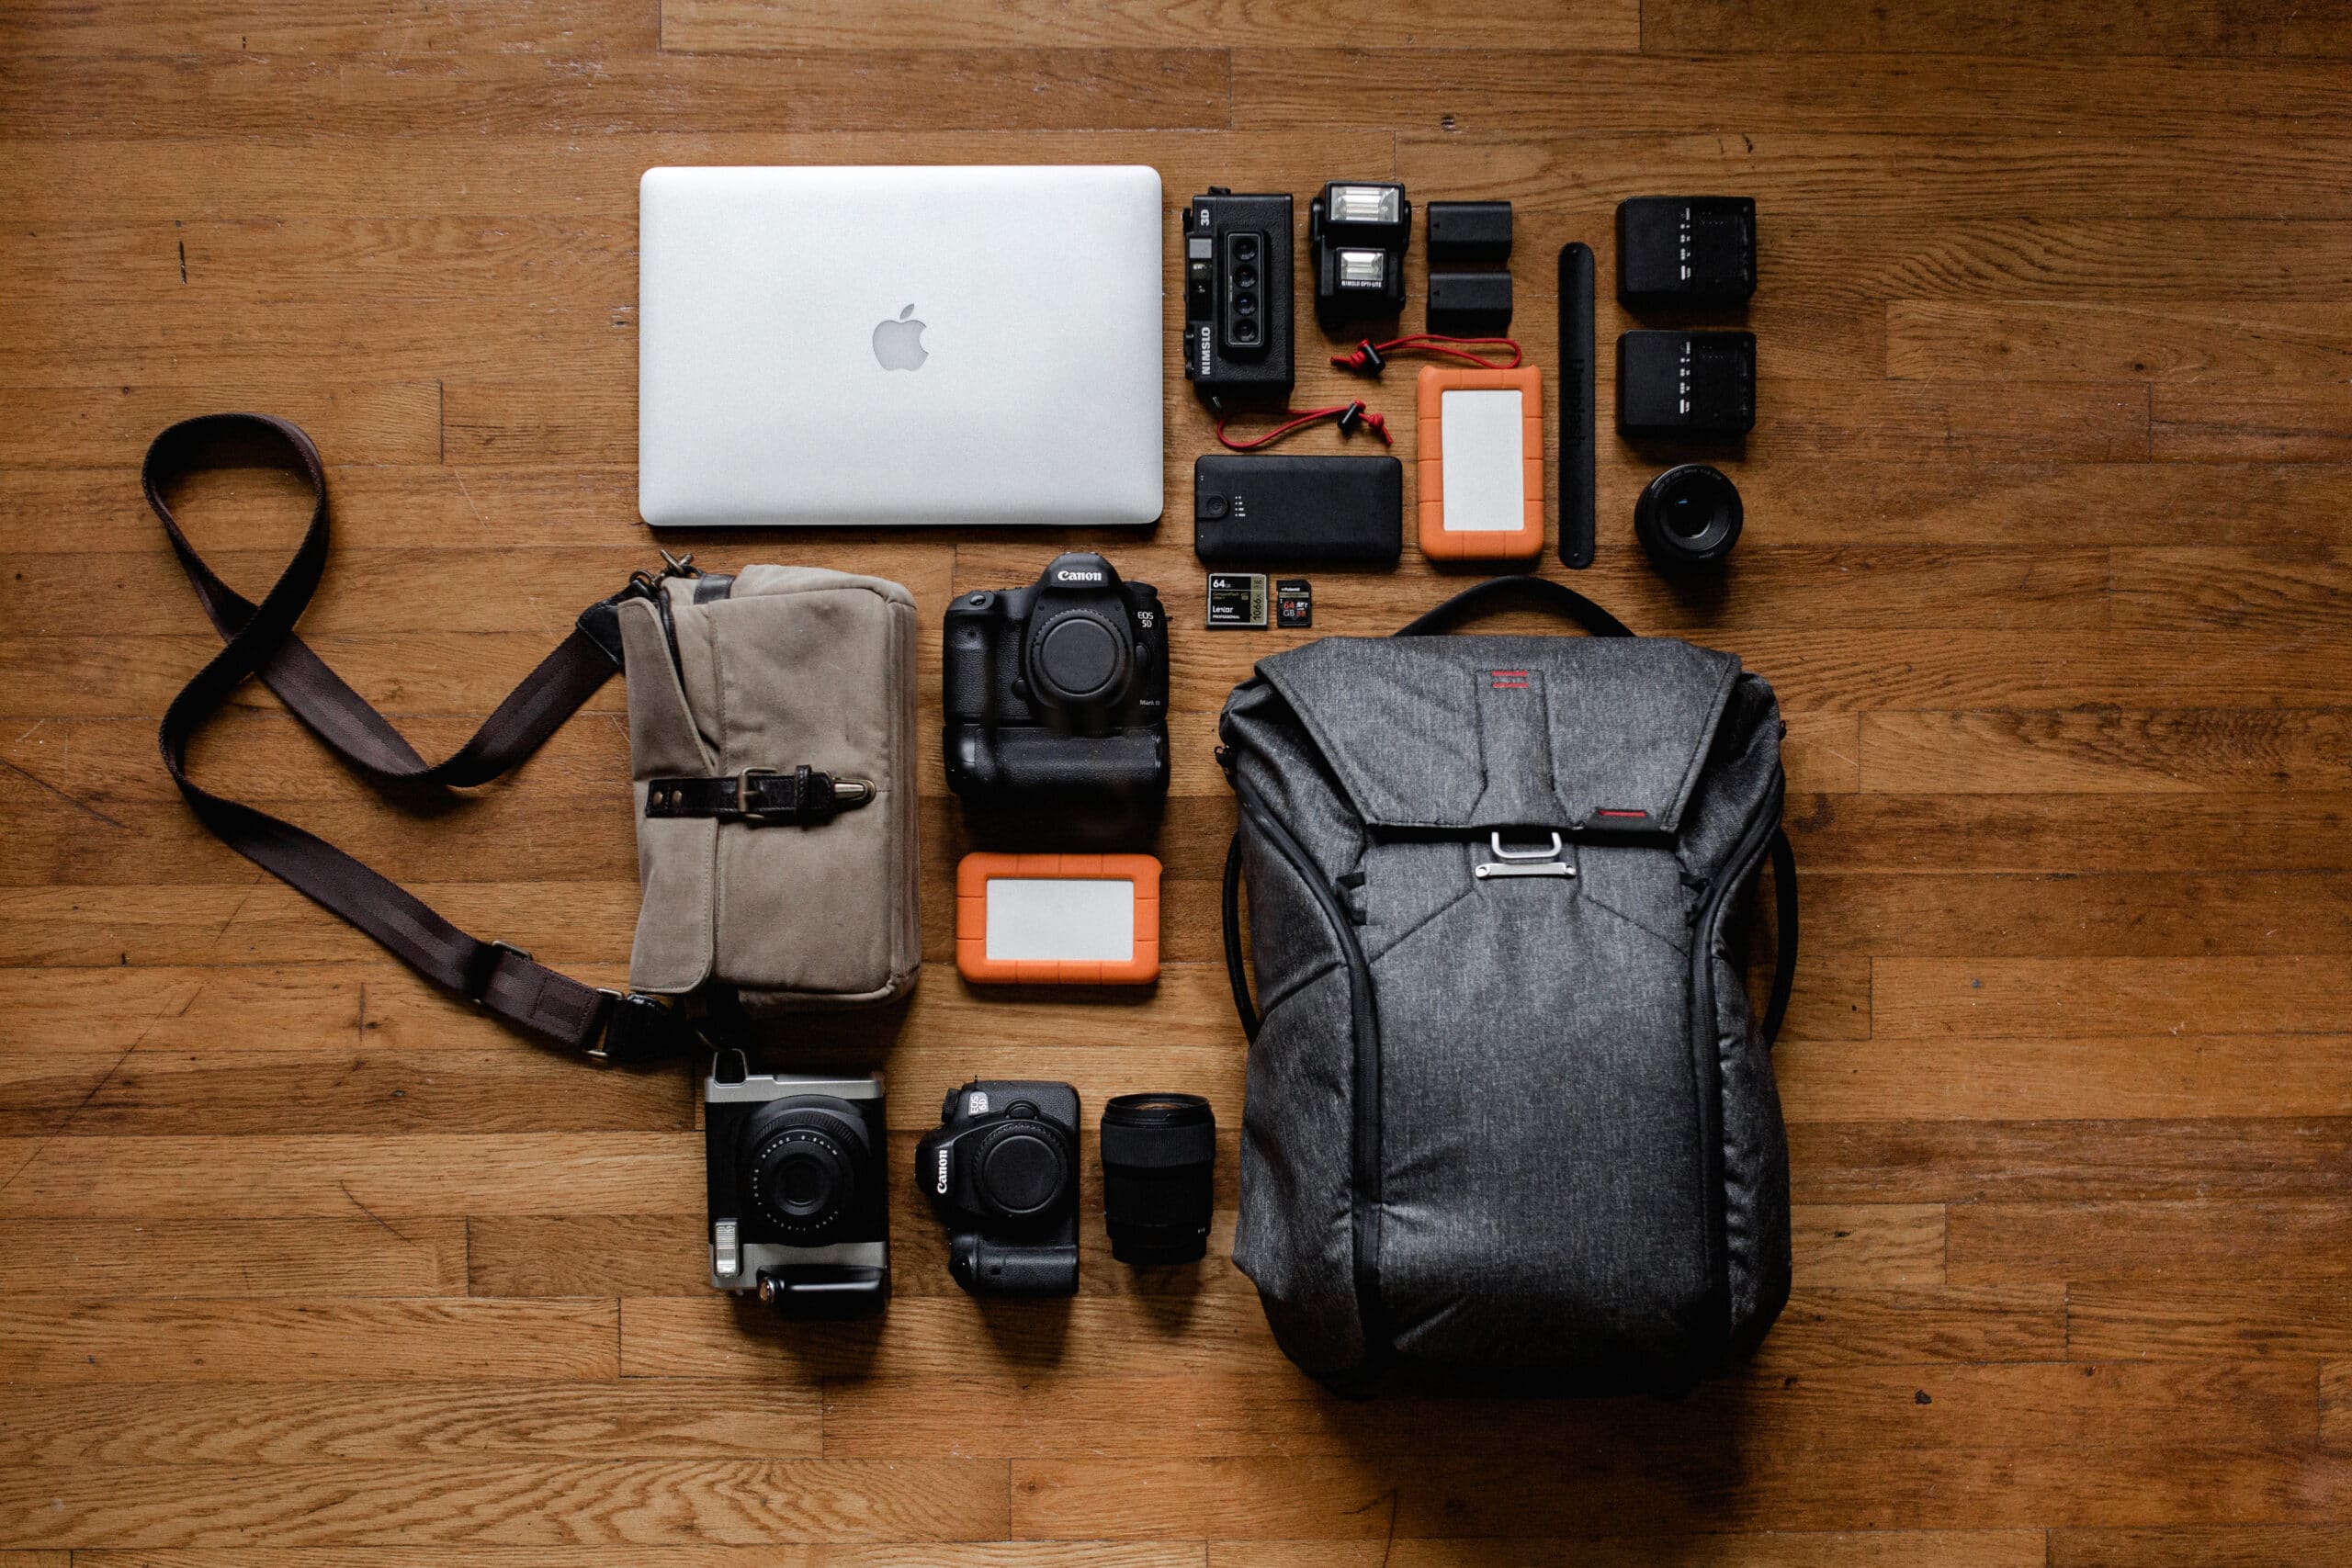 Top view photo gadgets on hardwood floor with a Tech Bag